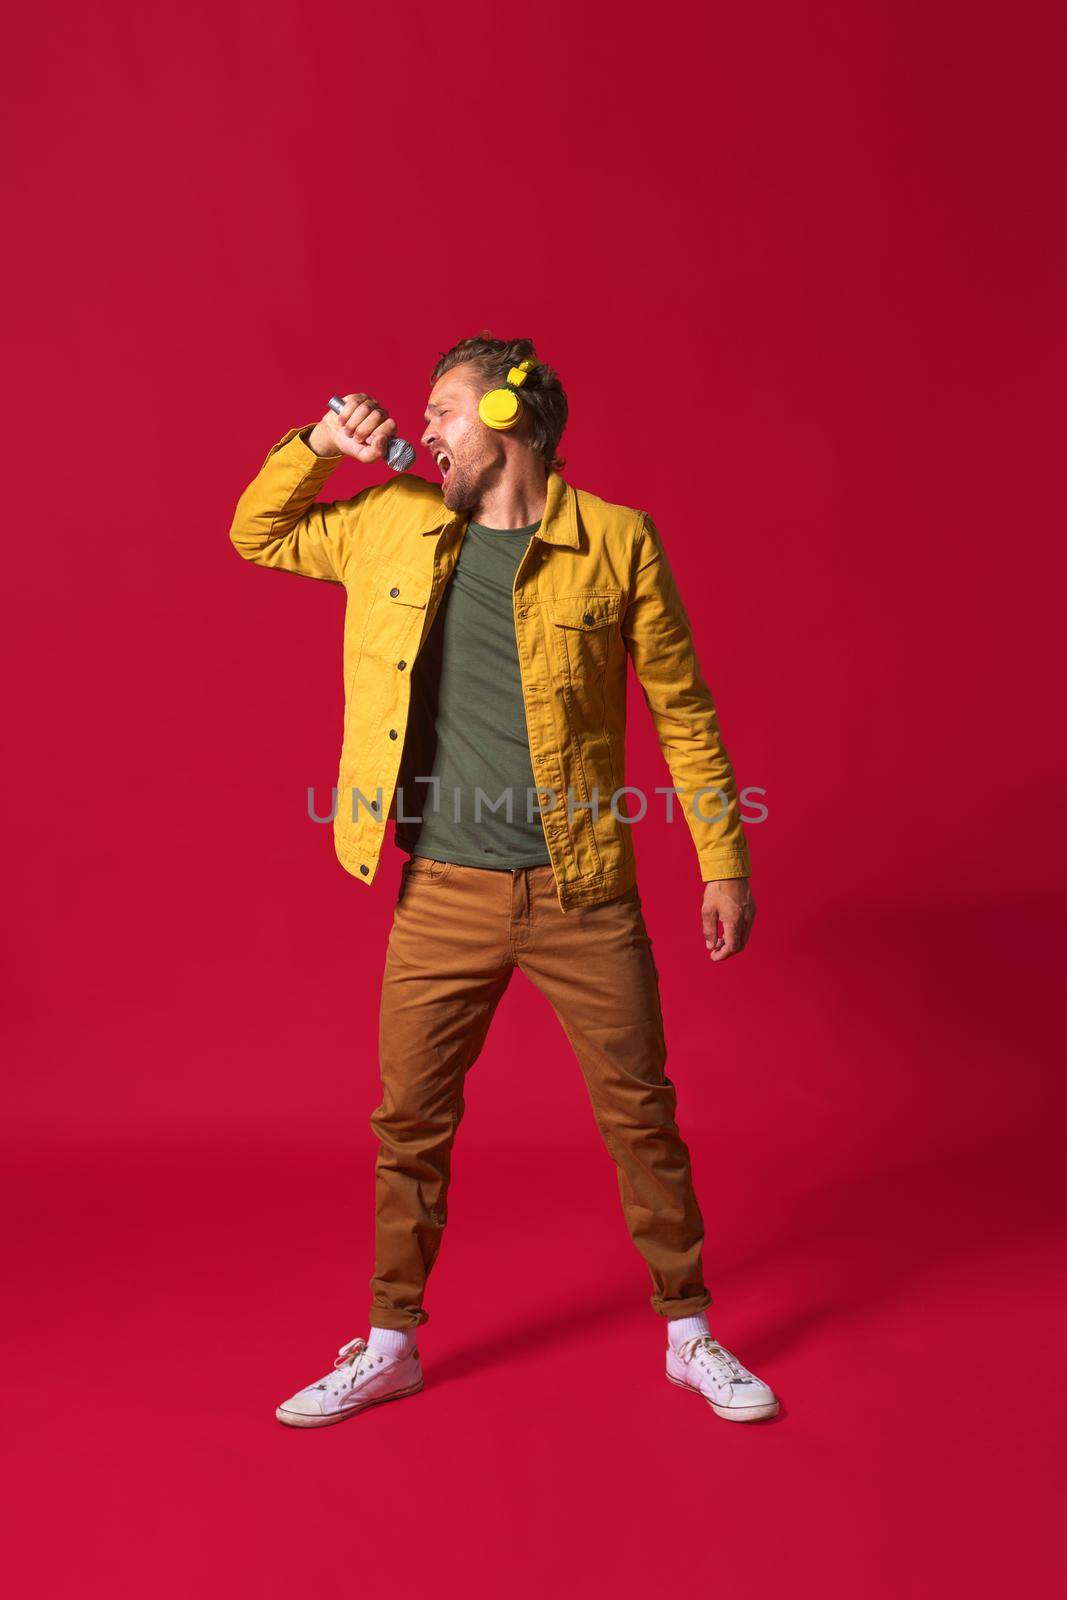 Singing young man enjoying his favorite song holding microphone and wireless headphones wearing casual jacket isolated on red background. Man sing while recording his voice by LipikStockMedia